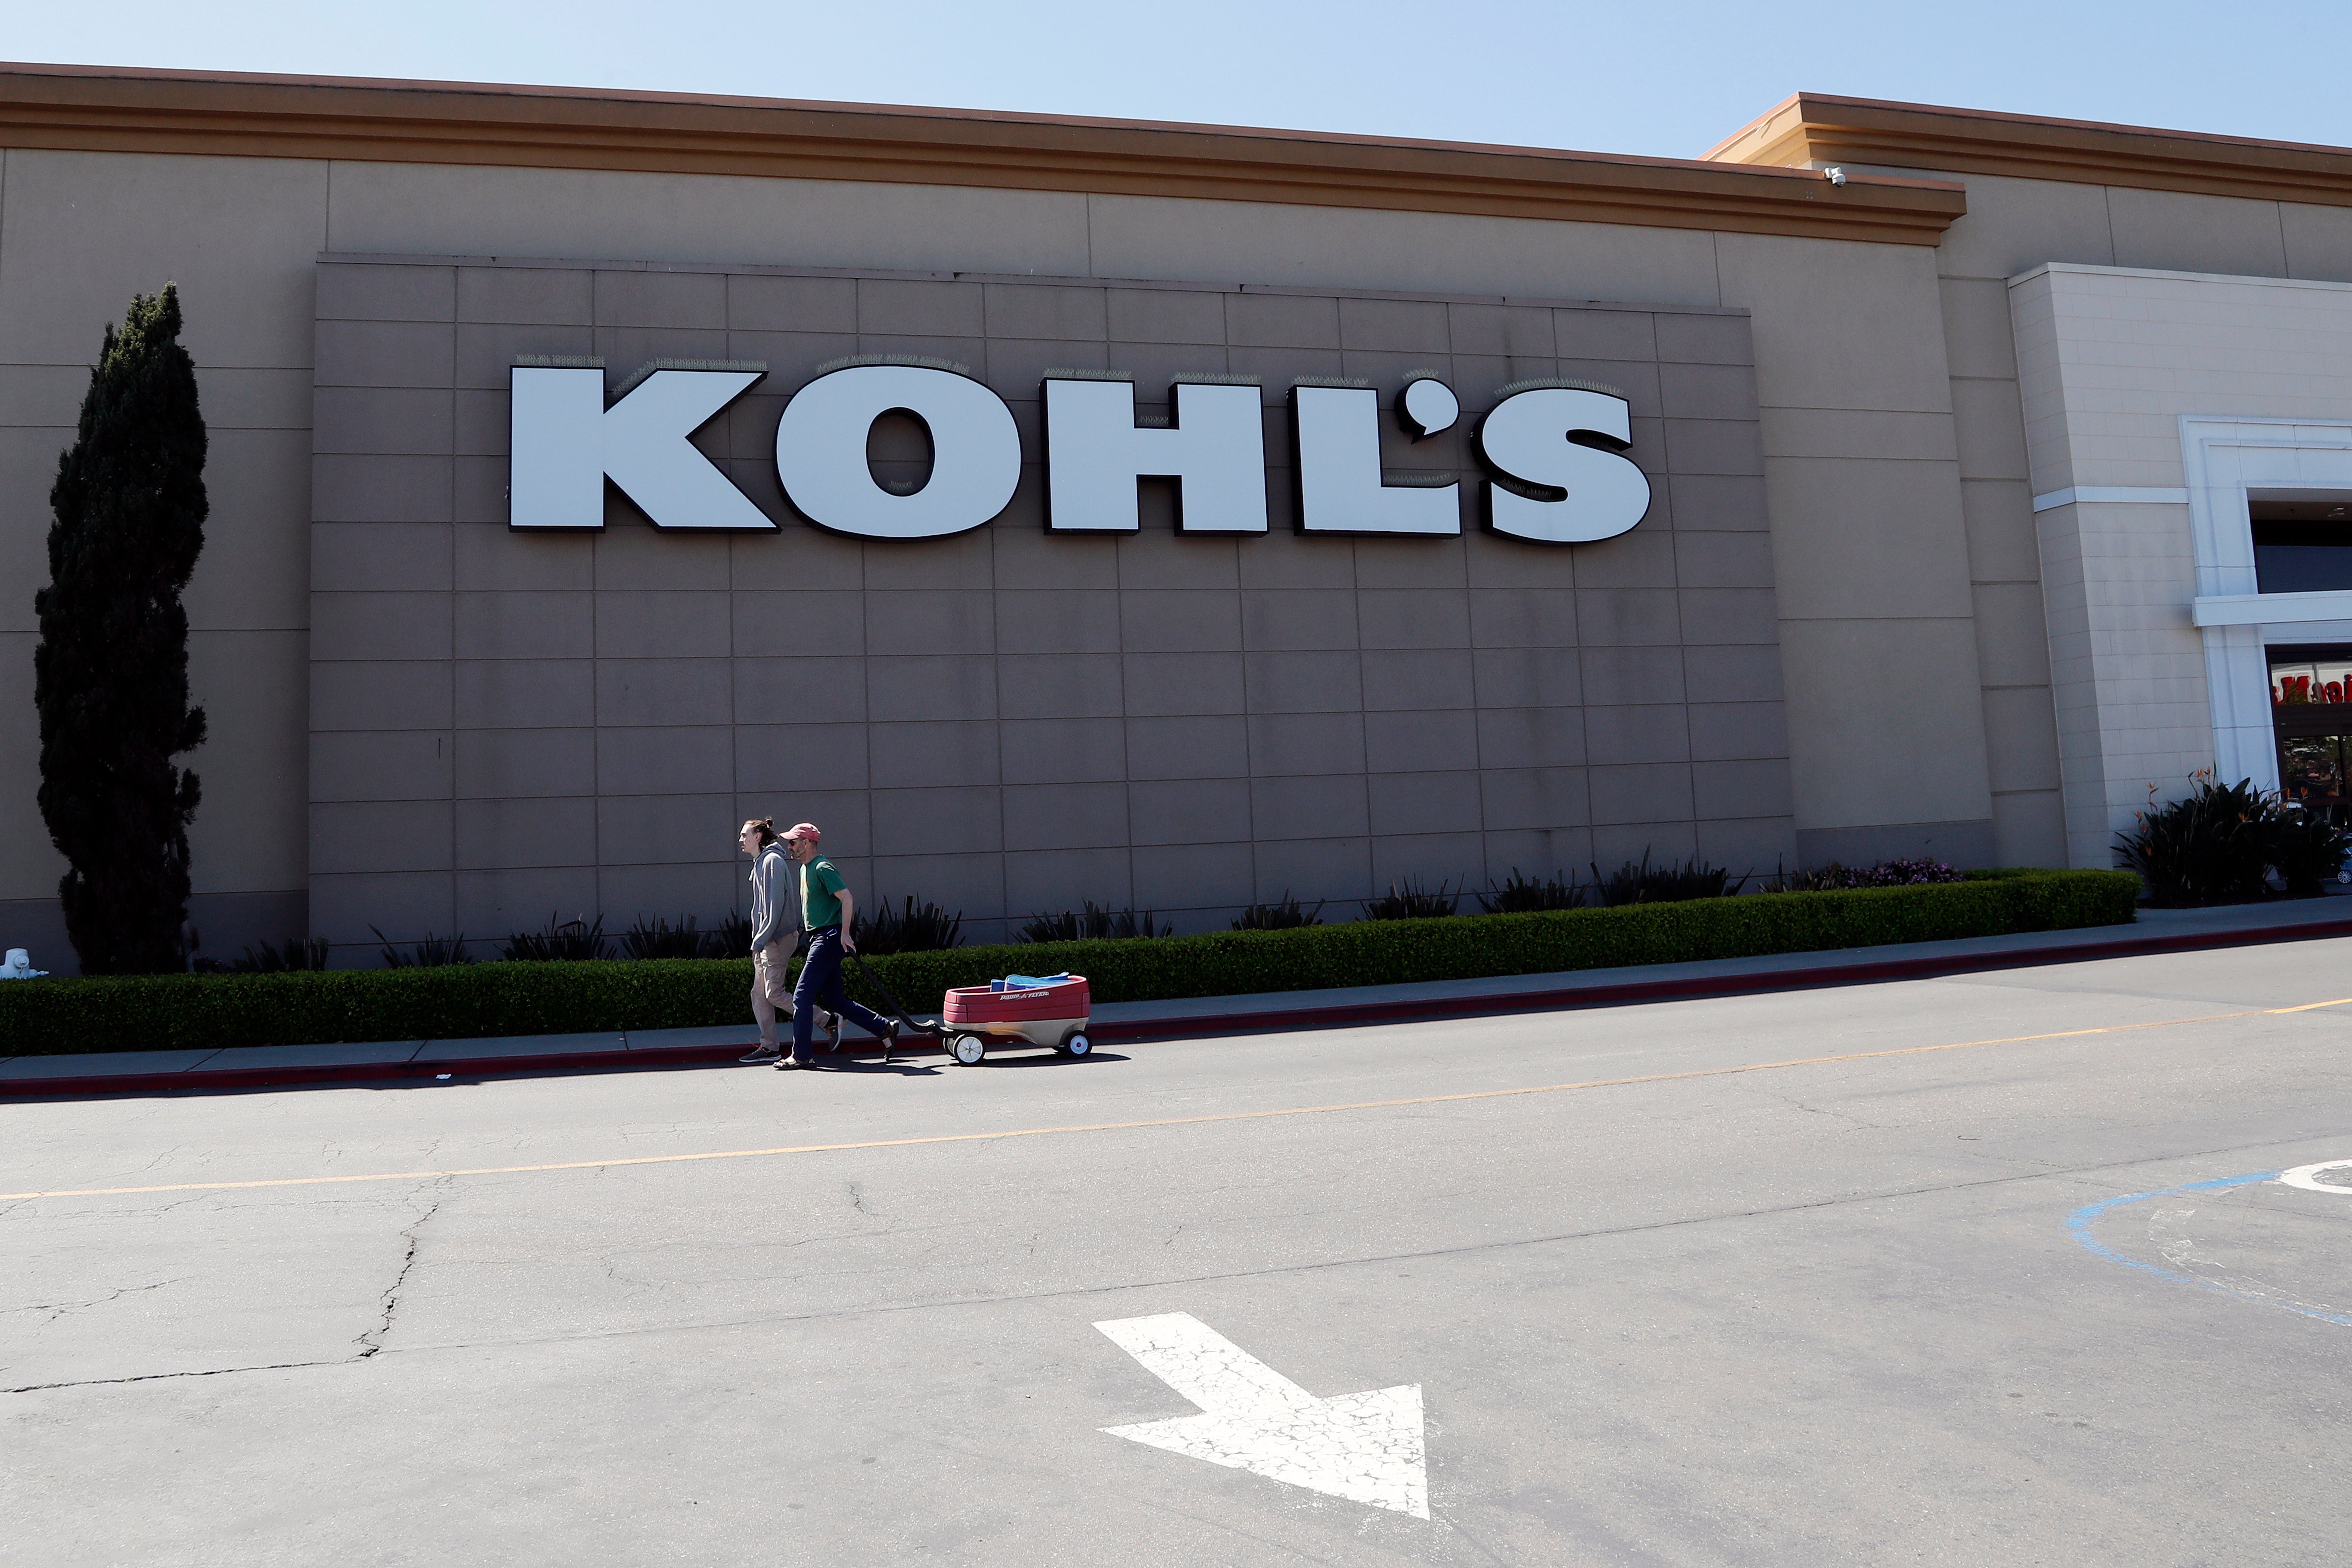 Kohl’s has announced that it will not be sponsoring any Republican National Convention events despite being headquartered in the same state